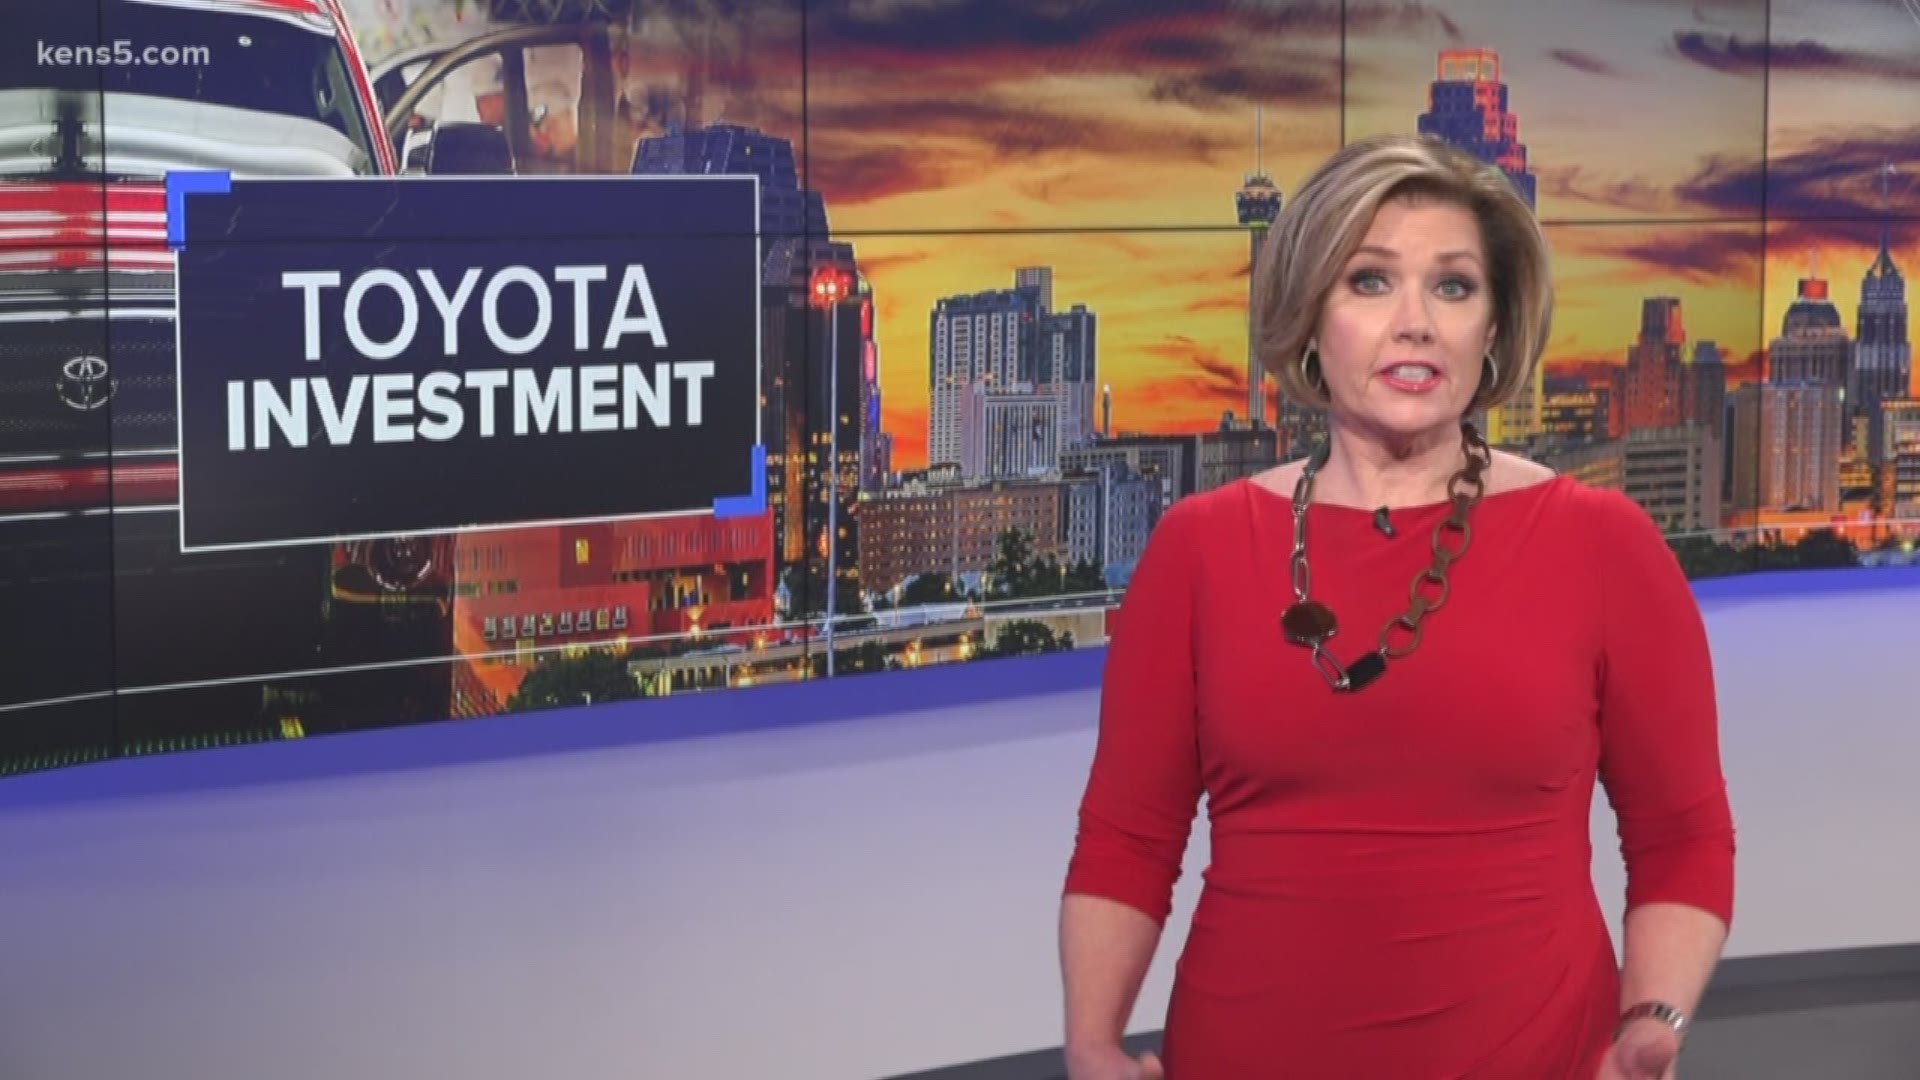 San Antonio Toyota plant in South San Antonio receives $9M tax abatement in hopes of increasing plant size and operations.